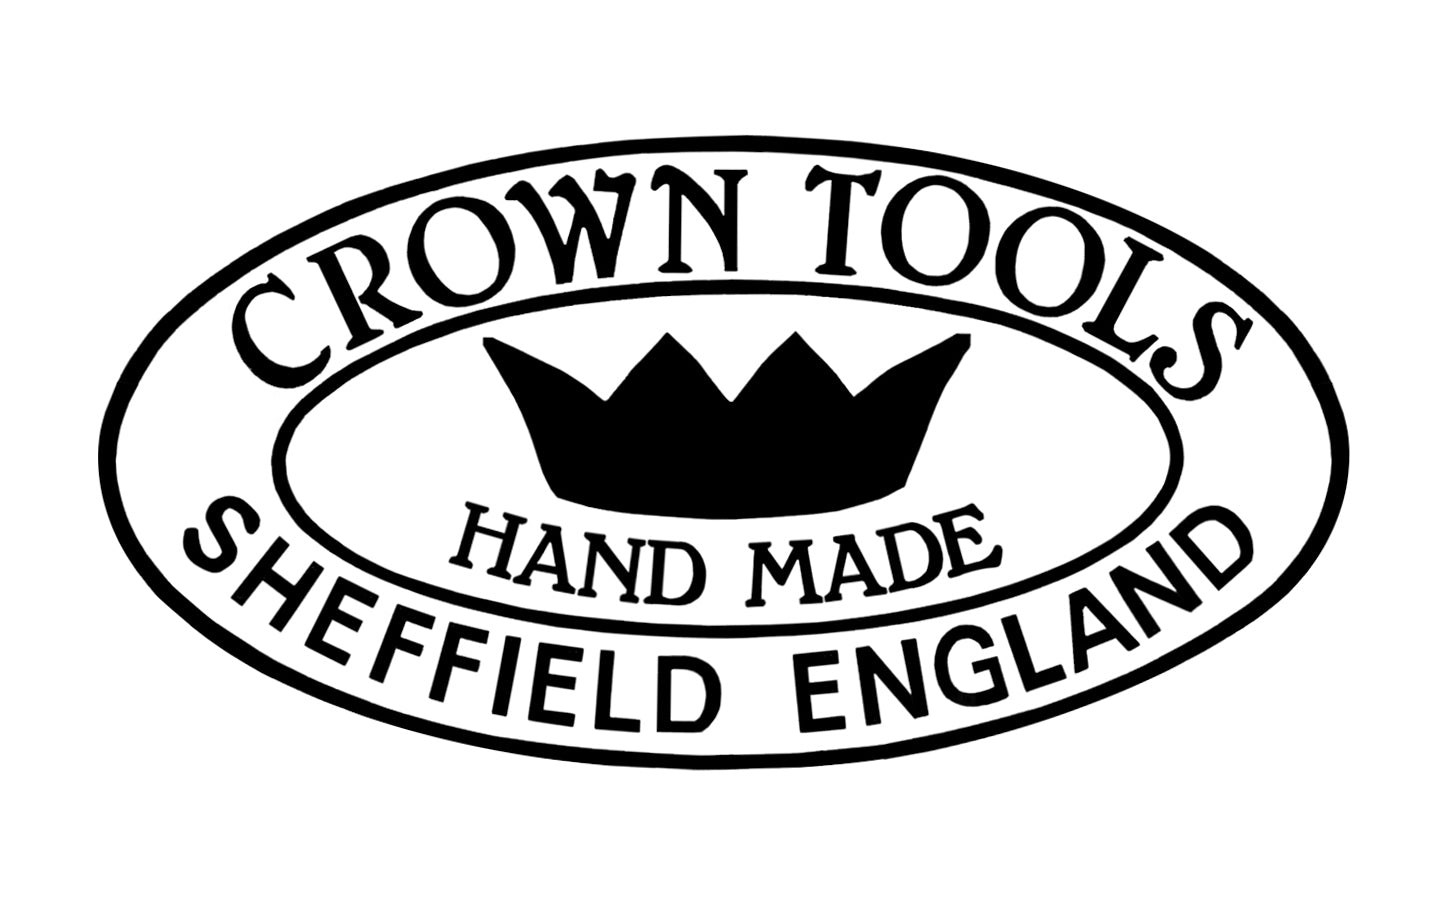 A special 4-piece mini cabinet scraper set made by Crown Tools in Sheffield, England. The scrapers creates razor-thin shavings & produces a fine smooth finish when used. Crown Tools Model 376M.